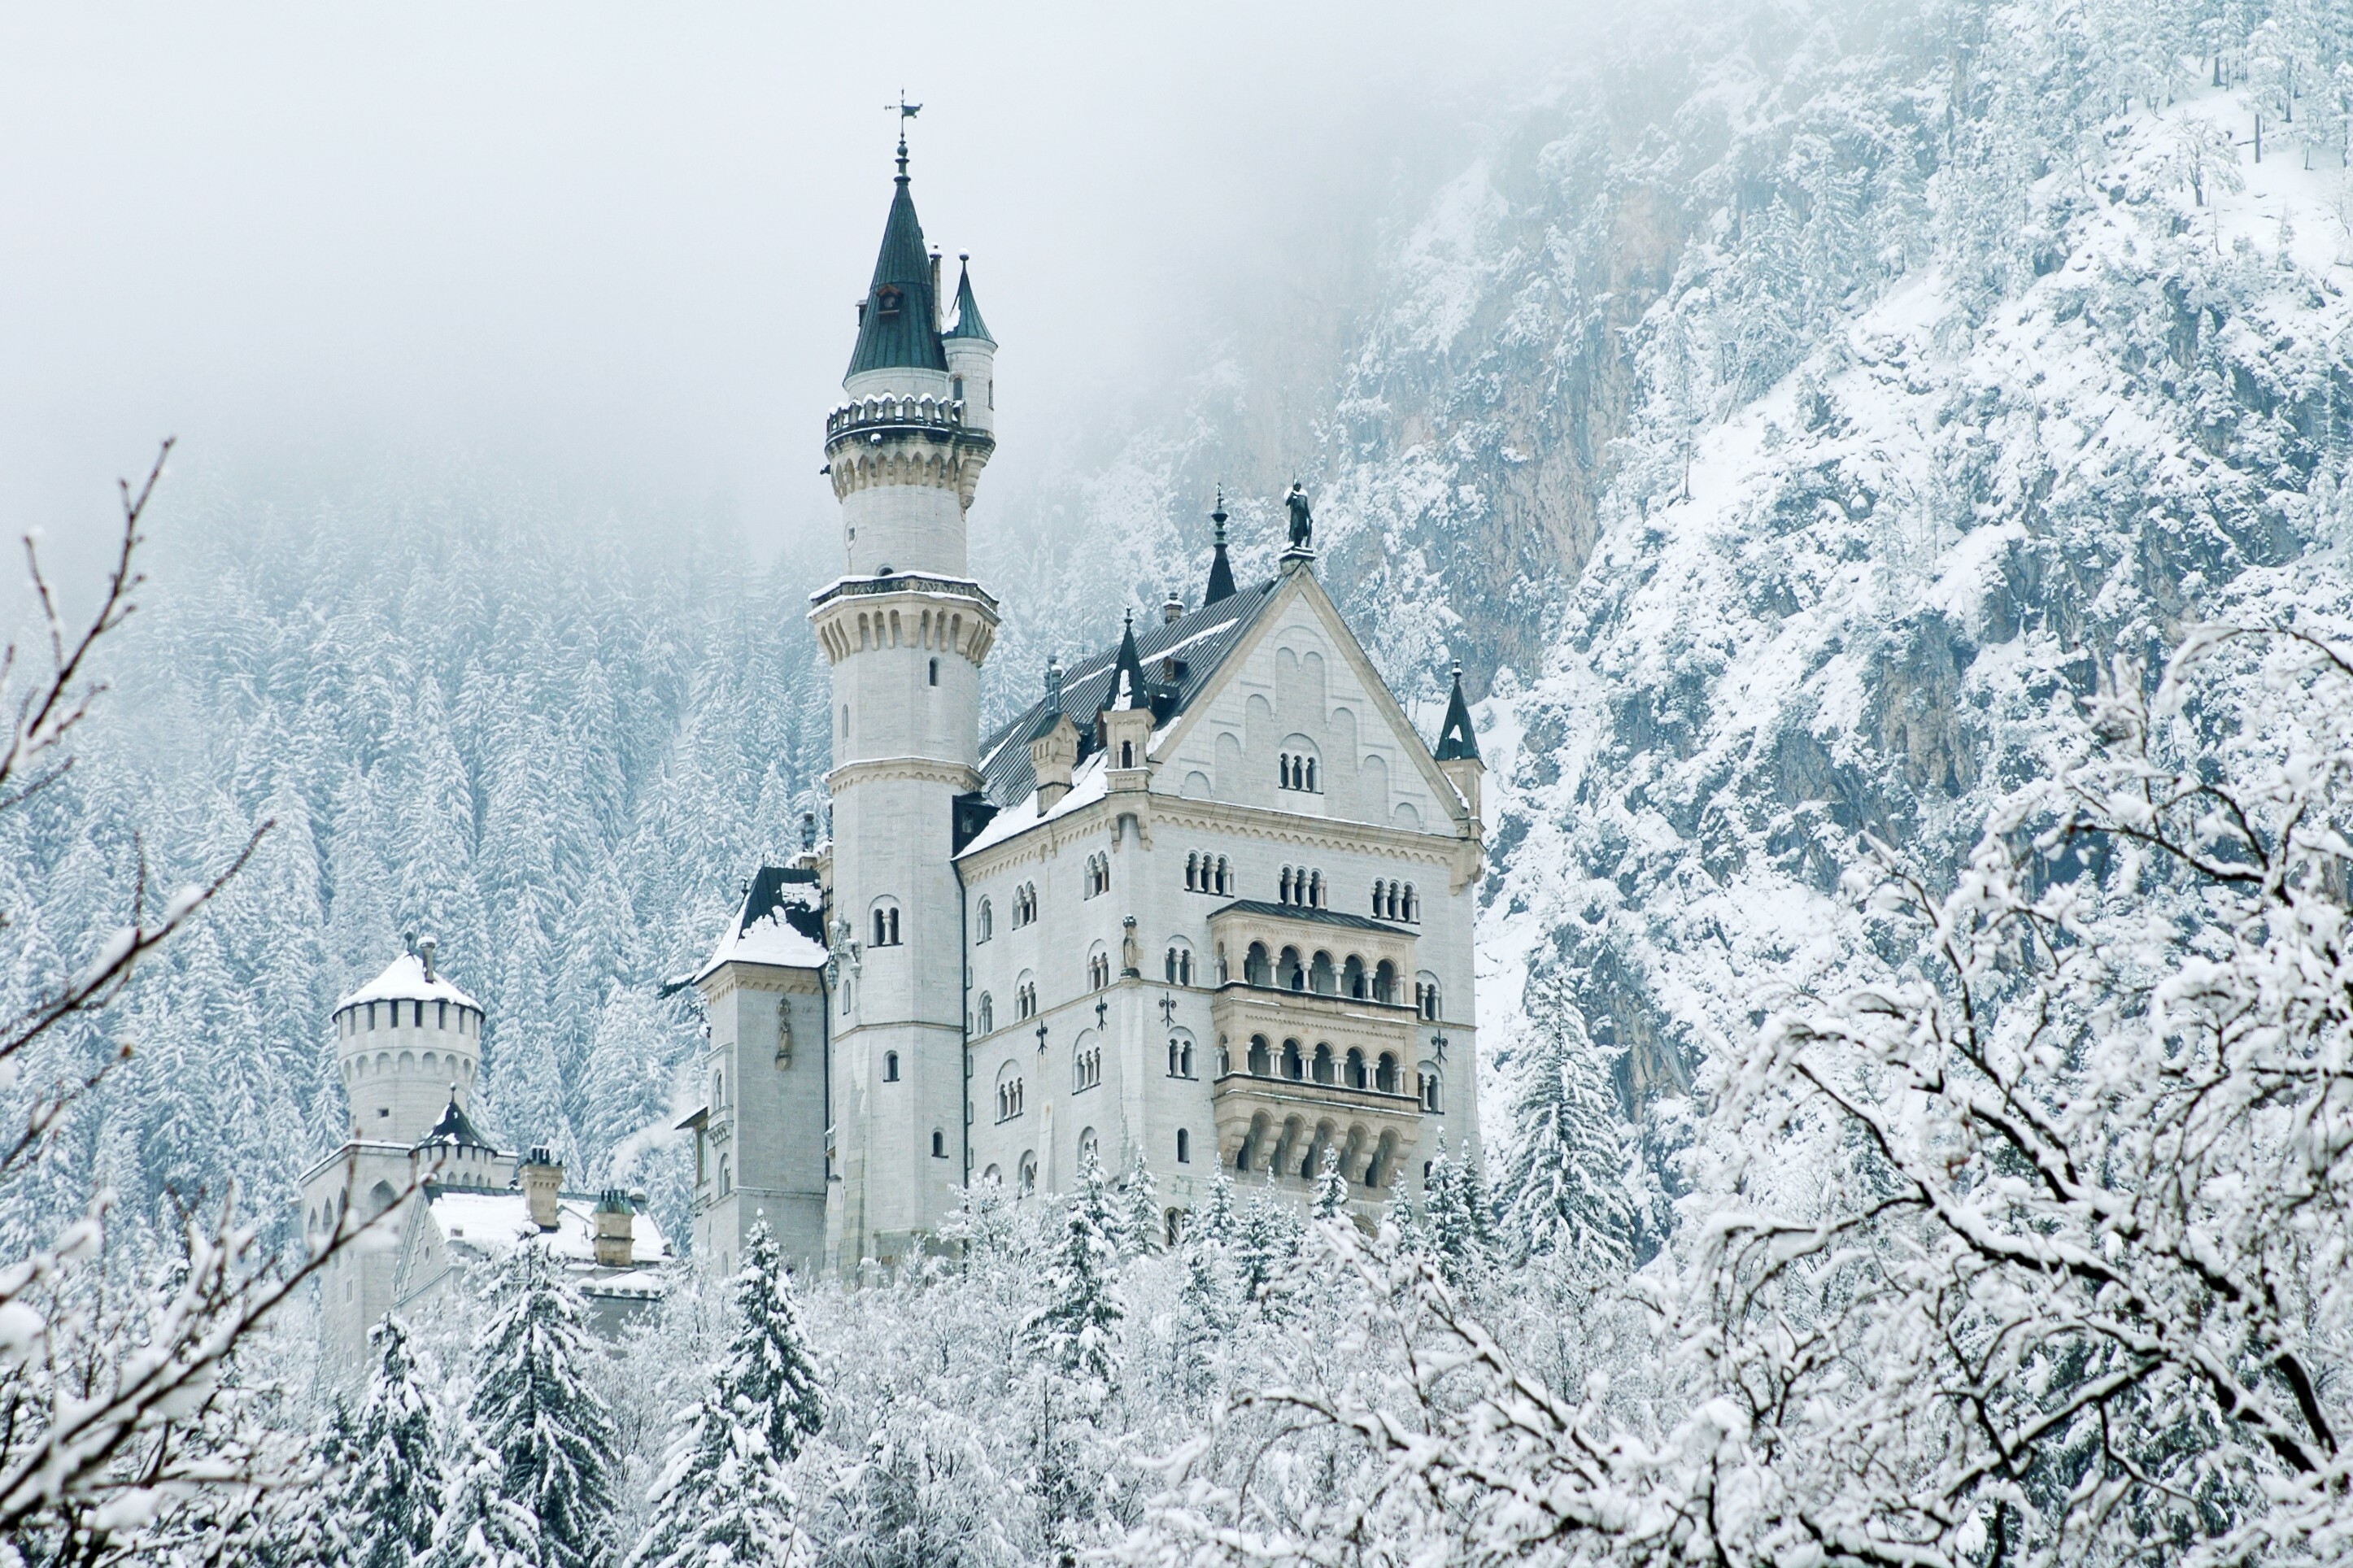 Neuschwanstein Castle: The palace was commissioned by King Ludwig II of Bavaria as a retreat and in honor of Richard Wagner. 2900x1930 HD Wallpaper.